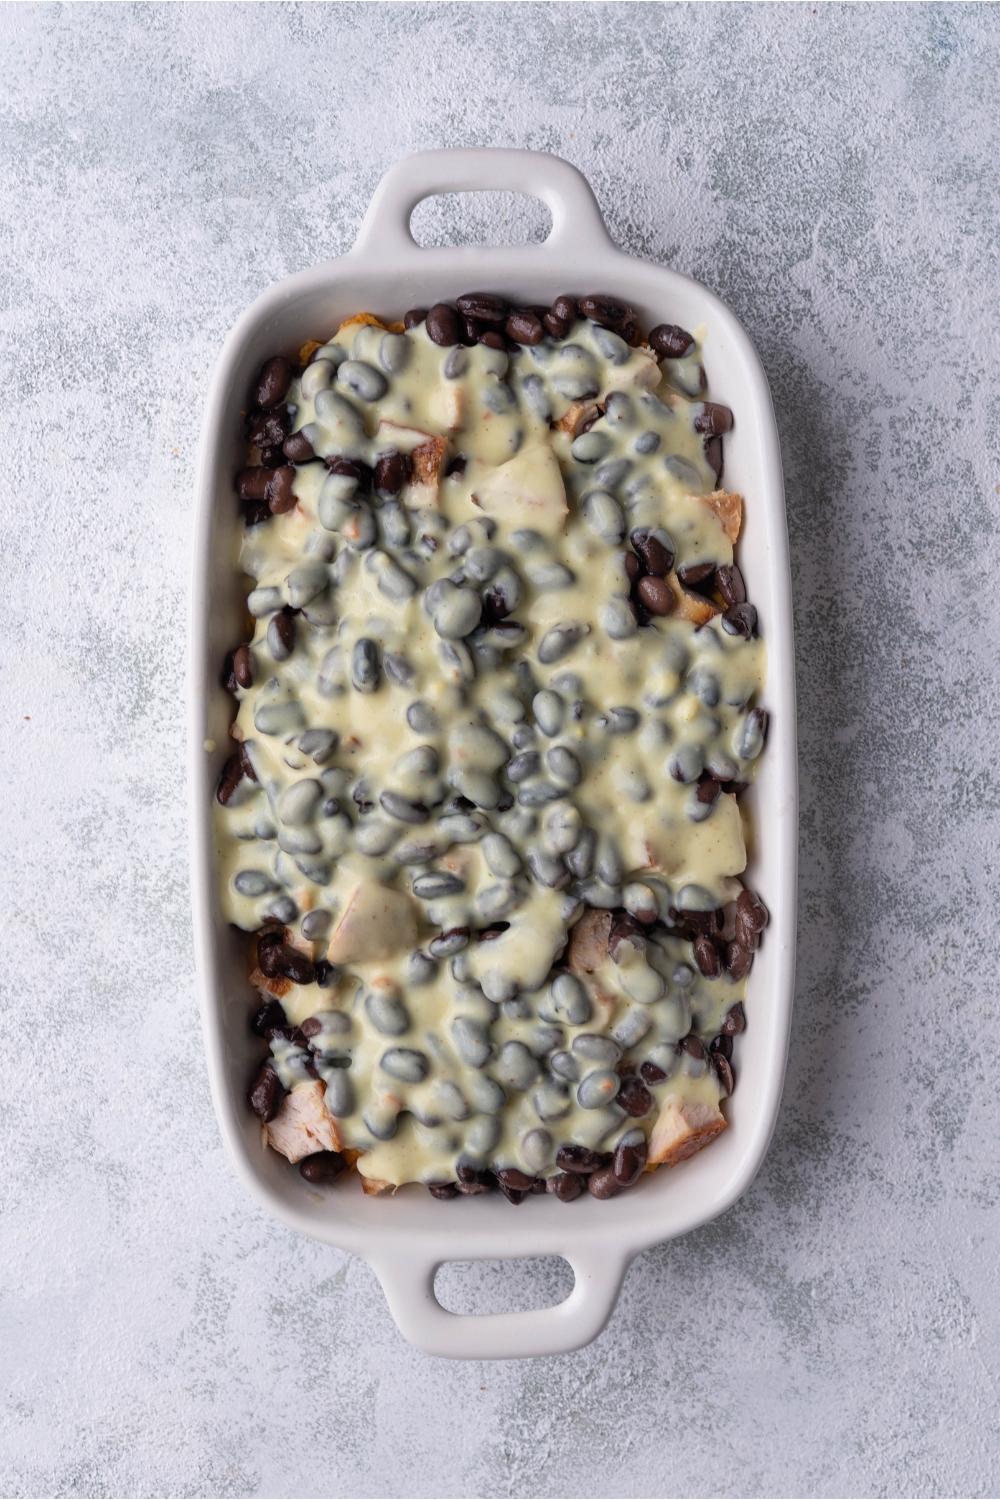 White baking dish filled with black beans, chicken and a creamy sauce.